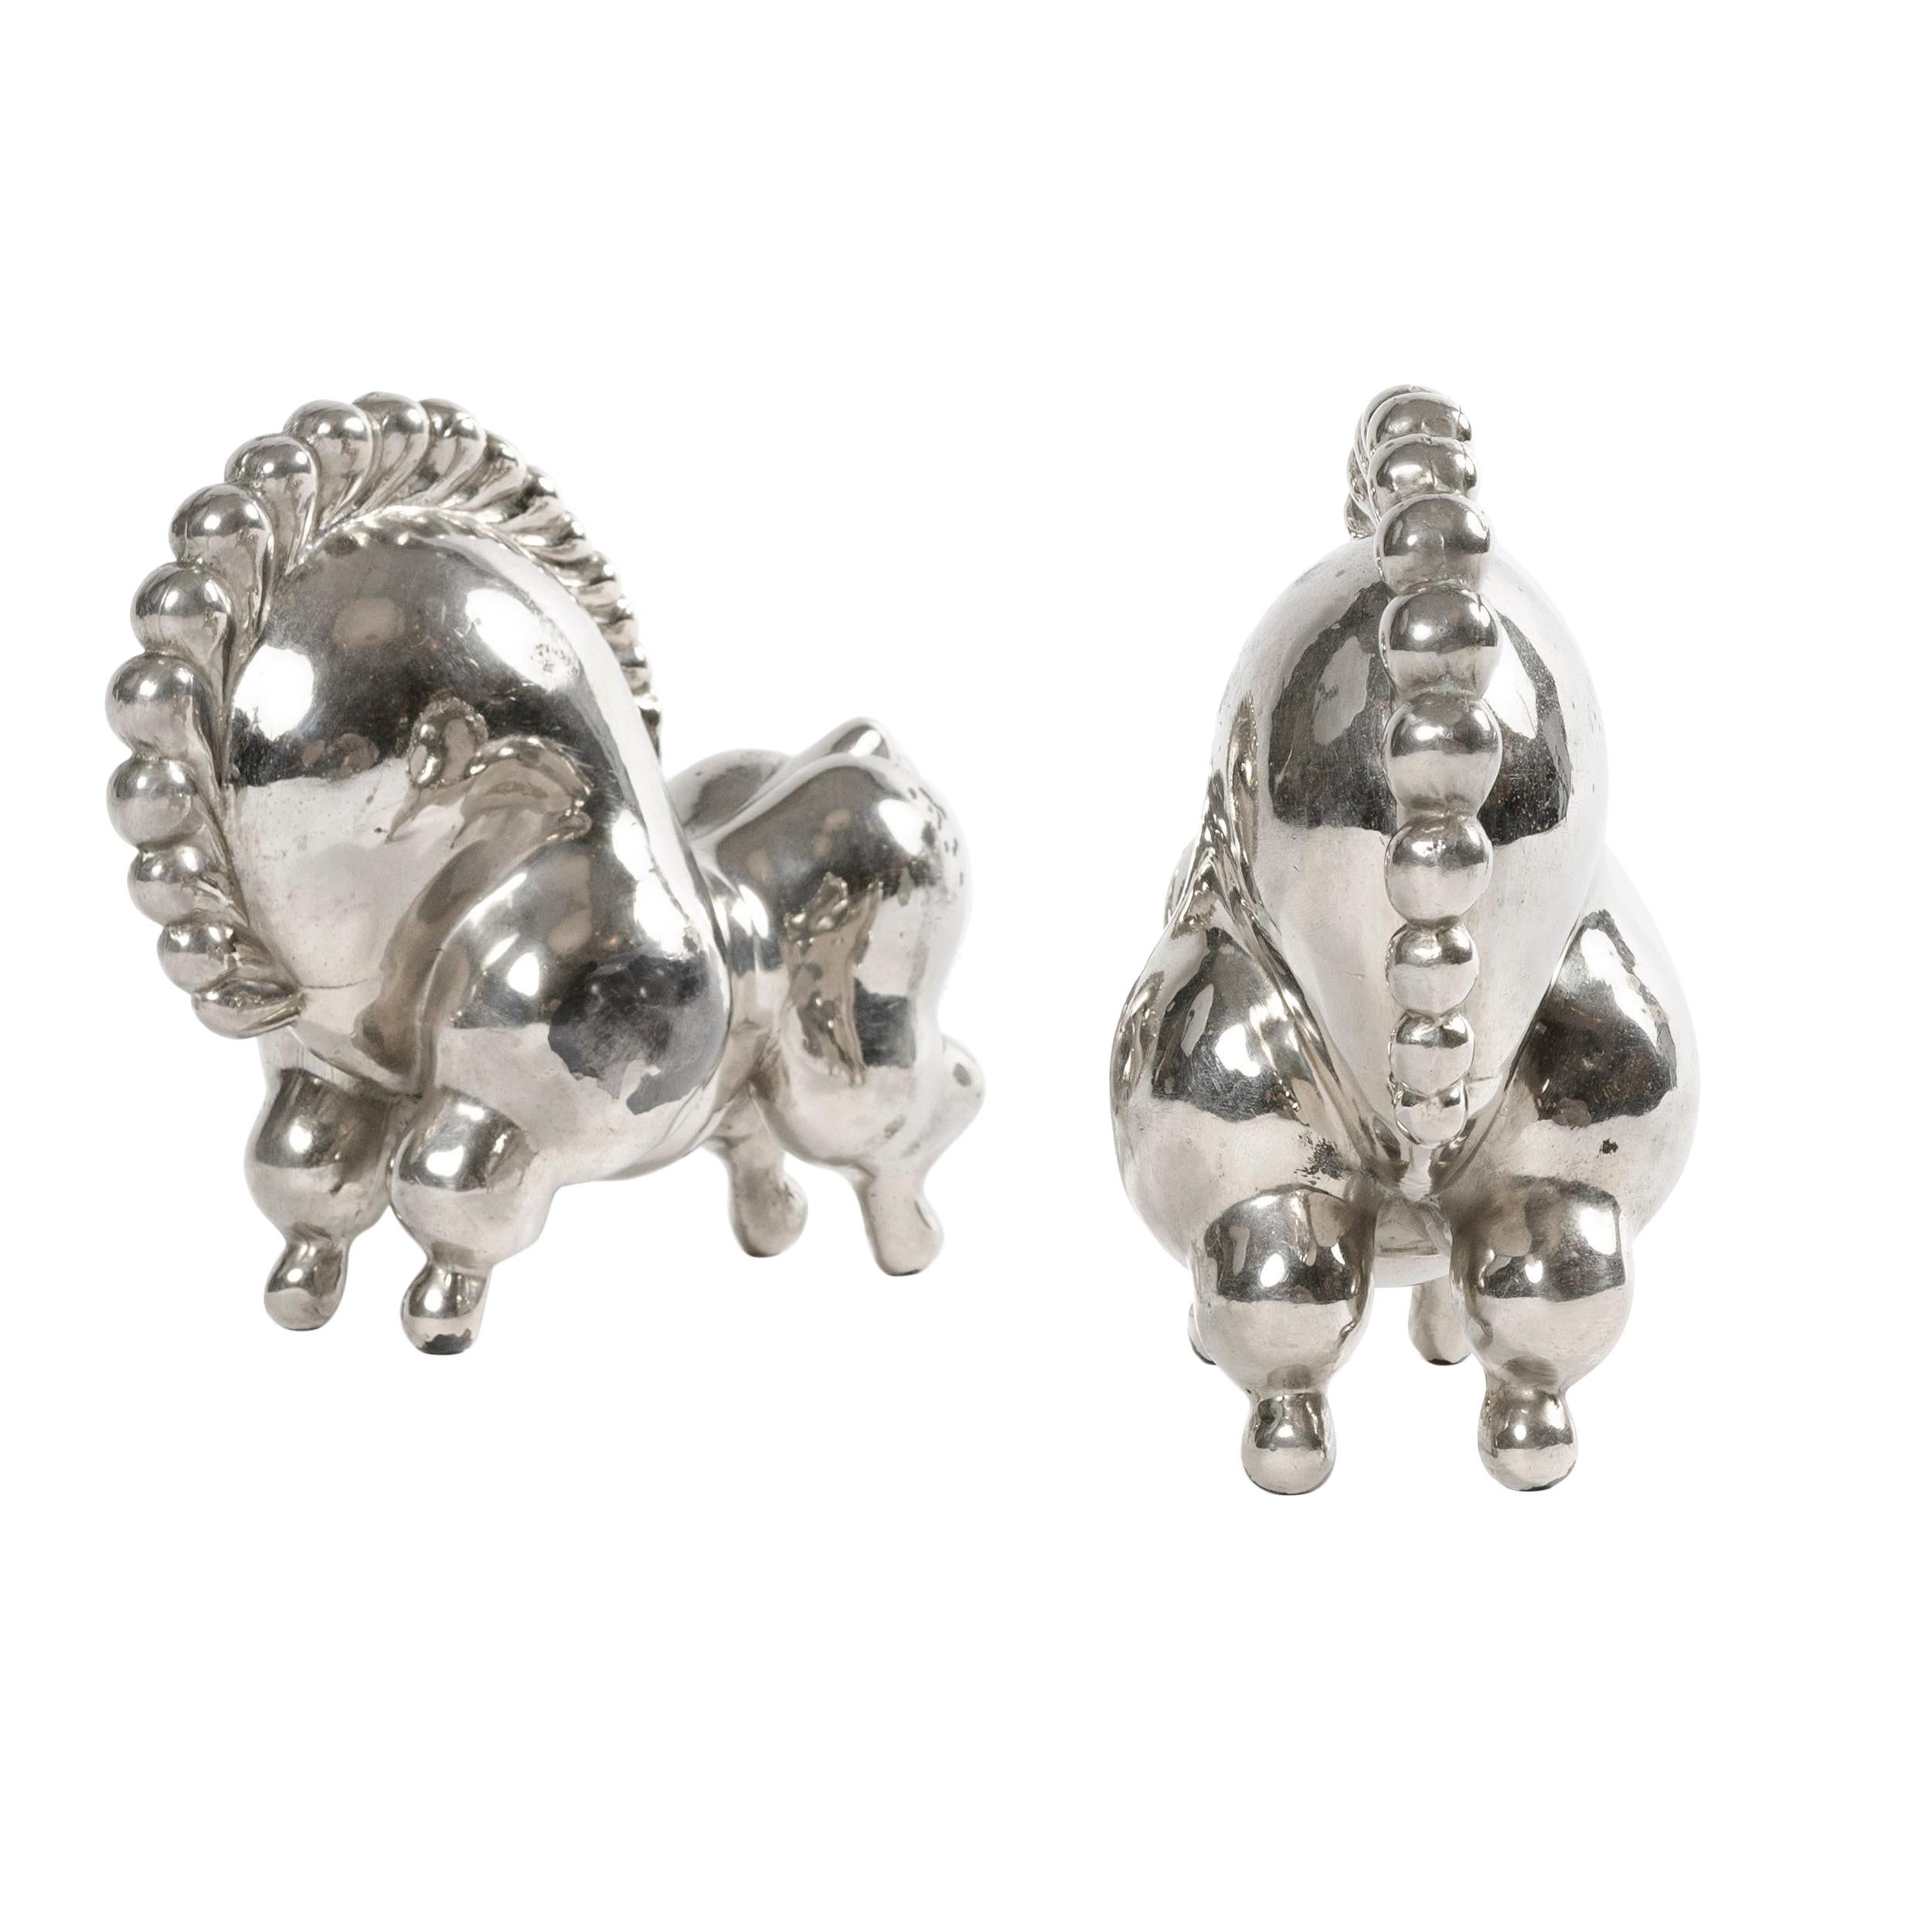 1930s Nickel-Plated 'Libbiloo' Circus Horse Bookends by Russel Wright